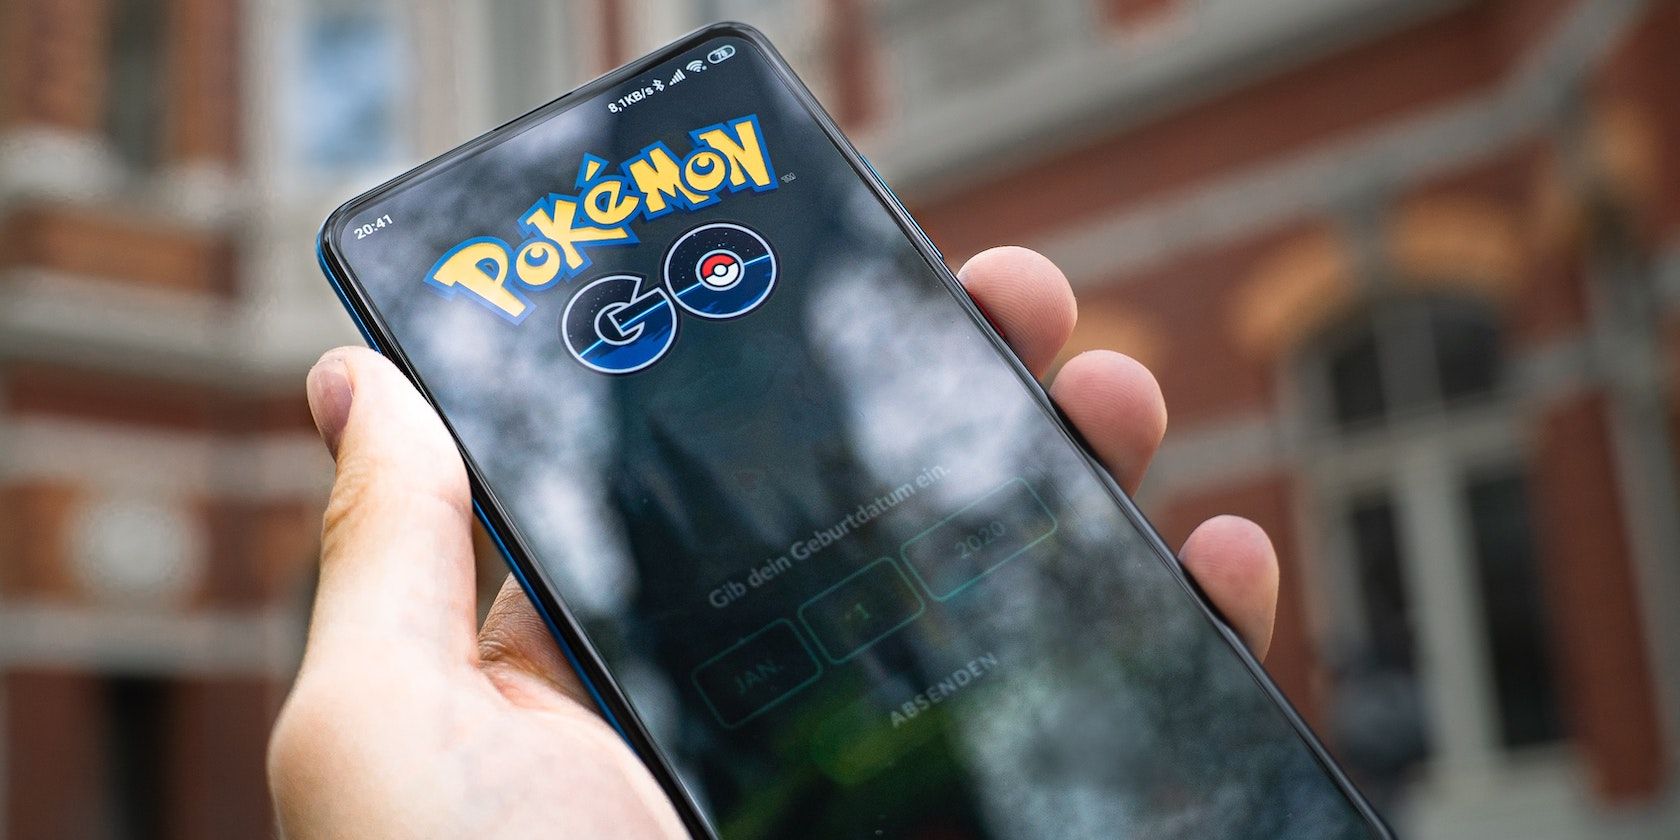 How to transfer Pokemon Go from old phone to new Android phone